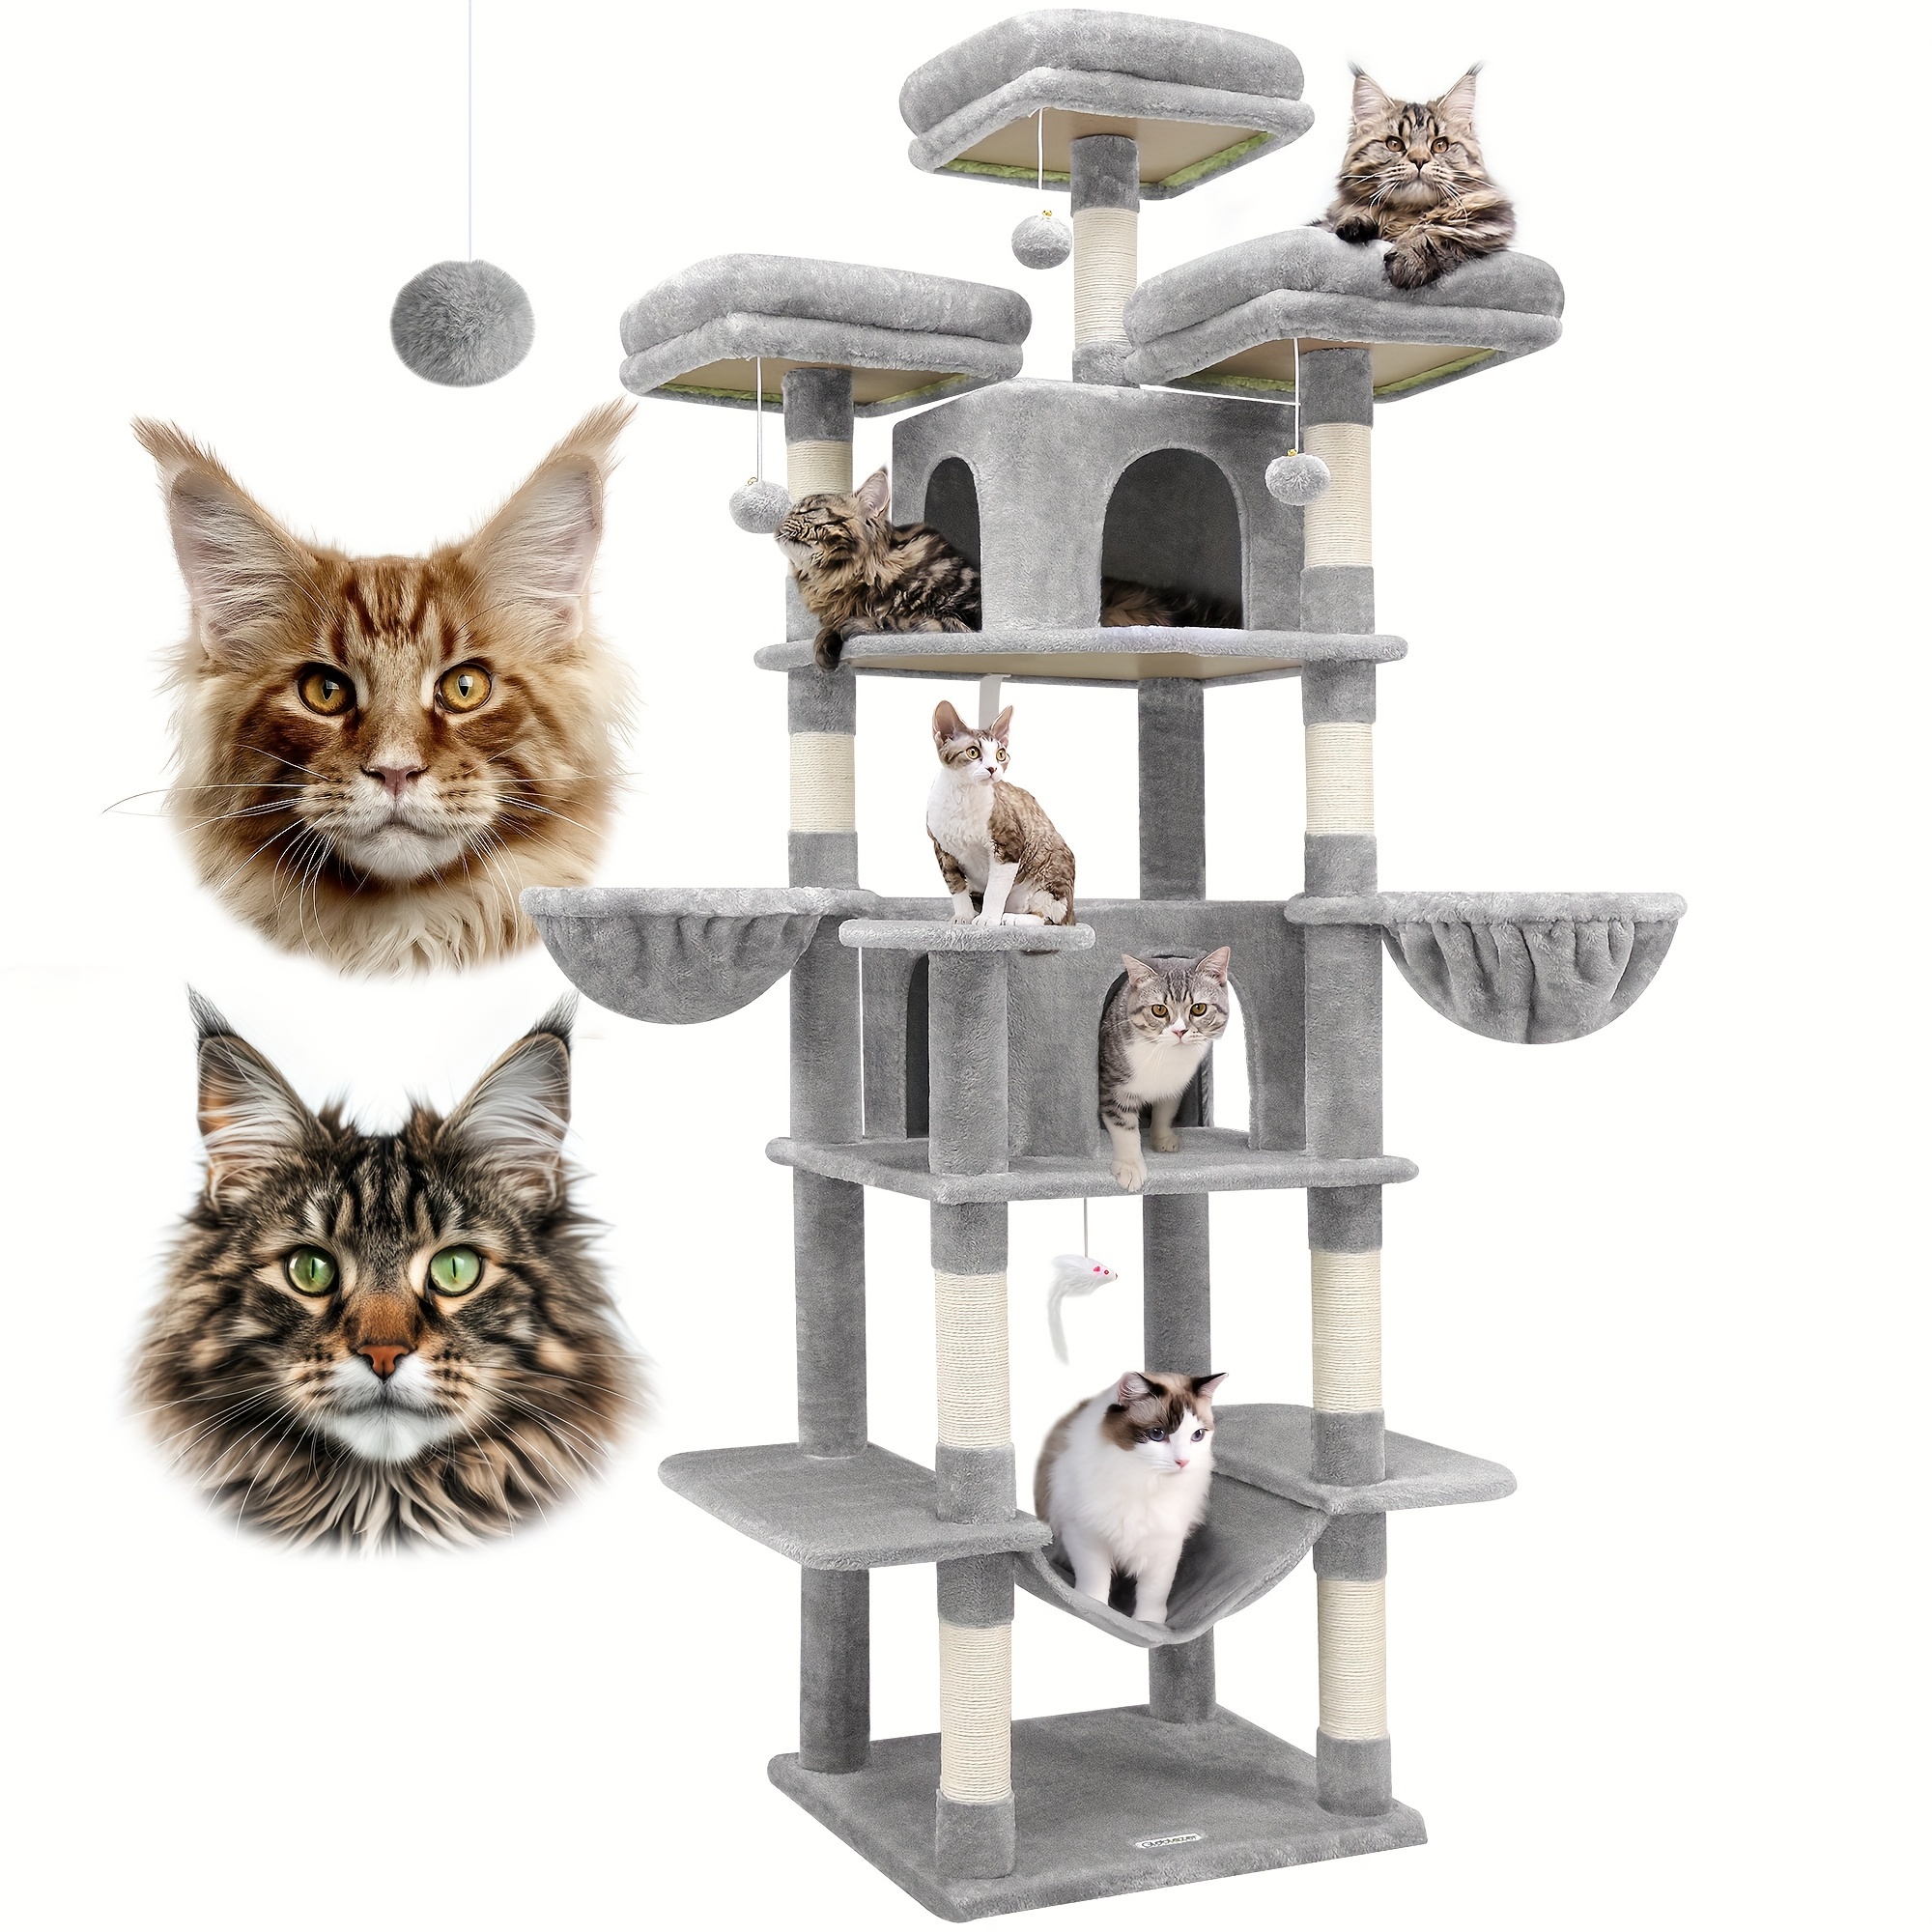 

Globlazer F80 Tall Cat Tree, 80inch Cat Tree Tower For Indoor Multiple Adult Cats Xxl Cat Tree With Scratching Post, Hammock, 3 Perches, 2 Condos, 2 Hanging Basket